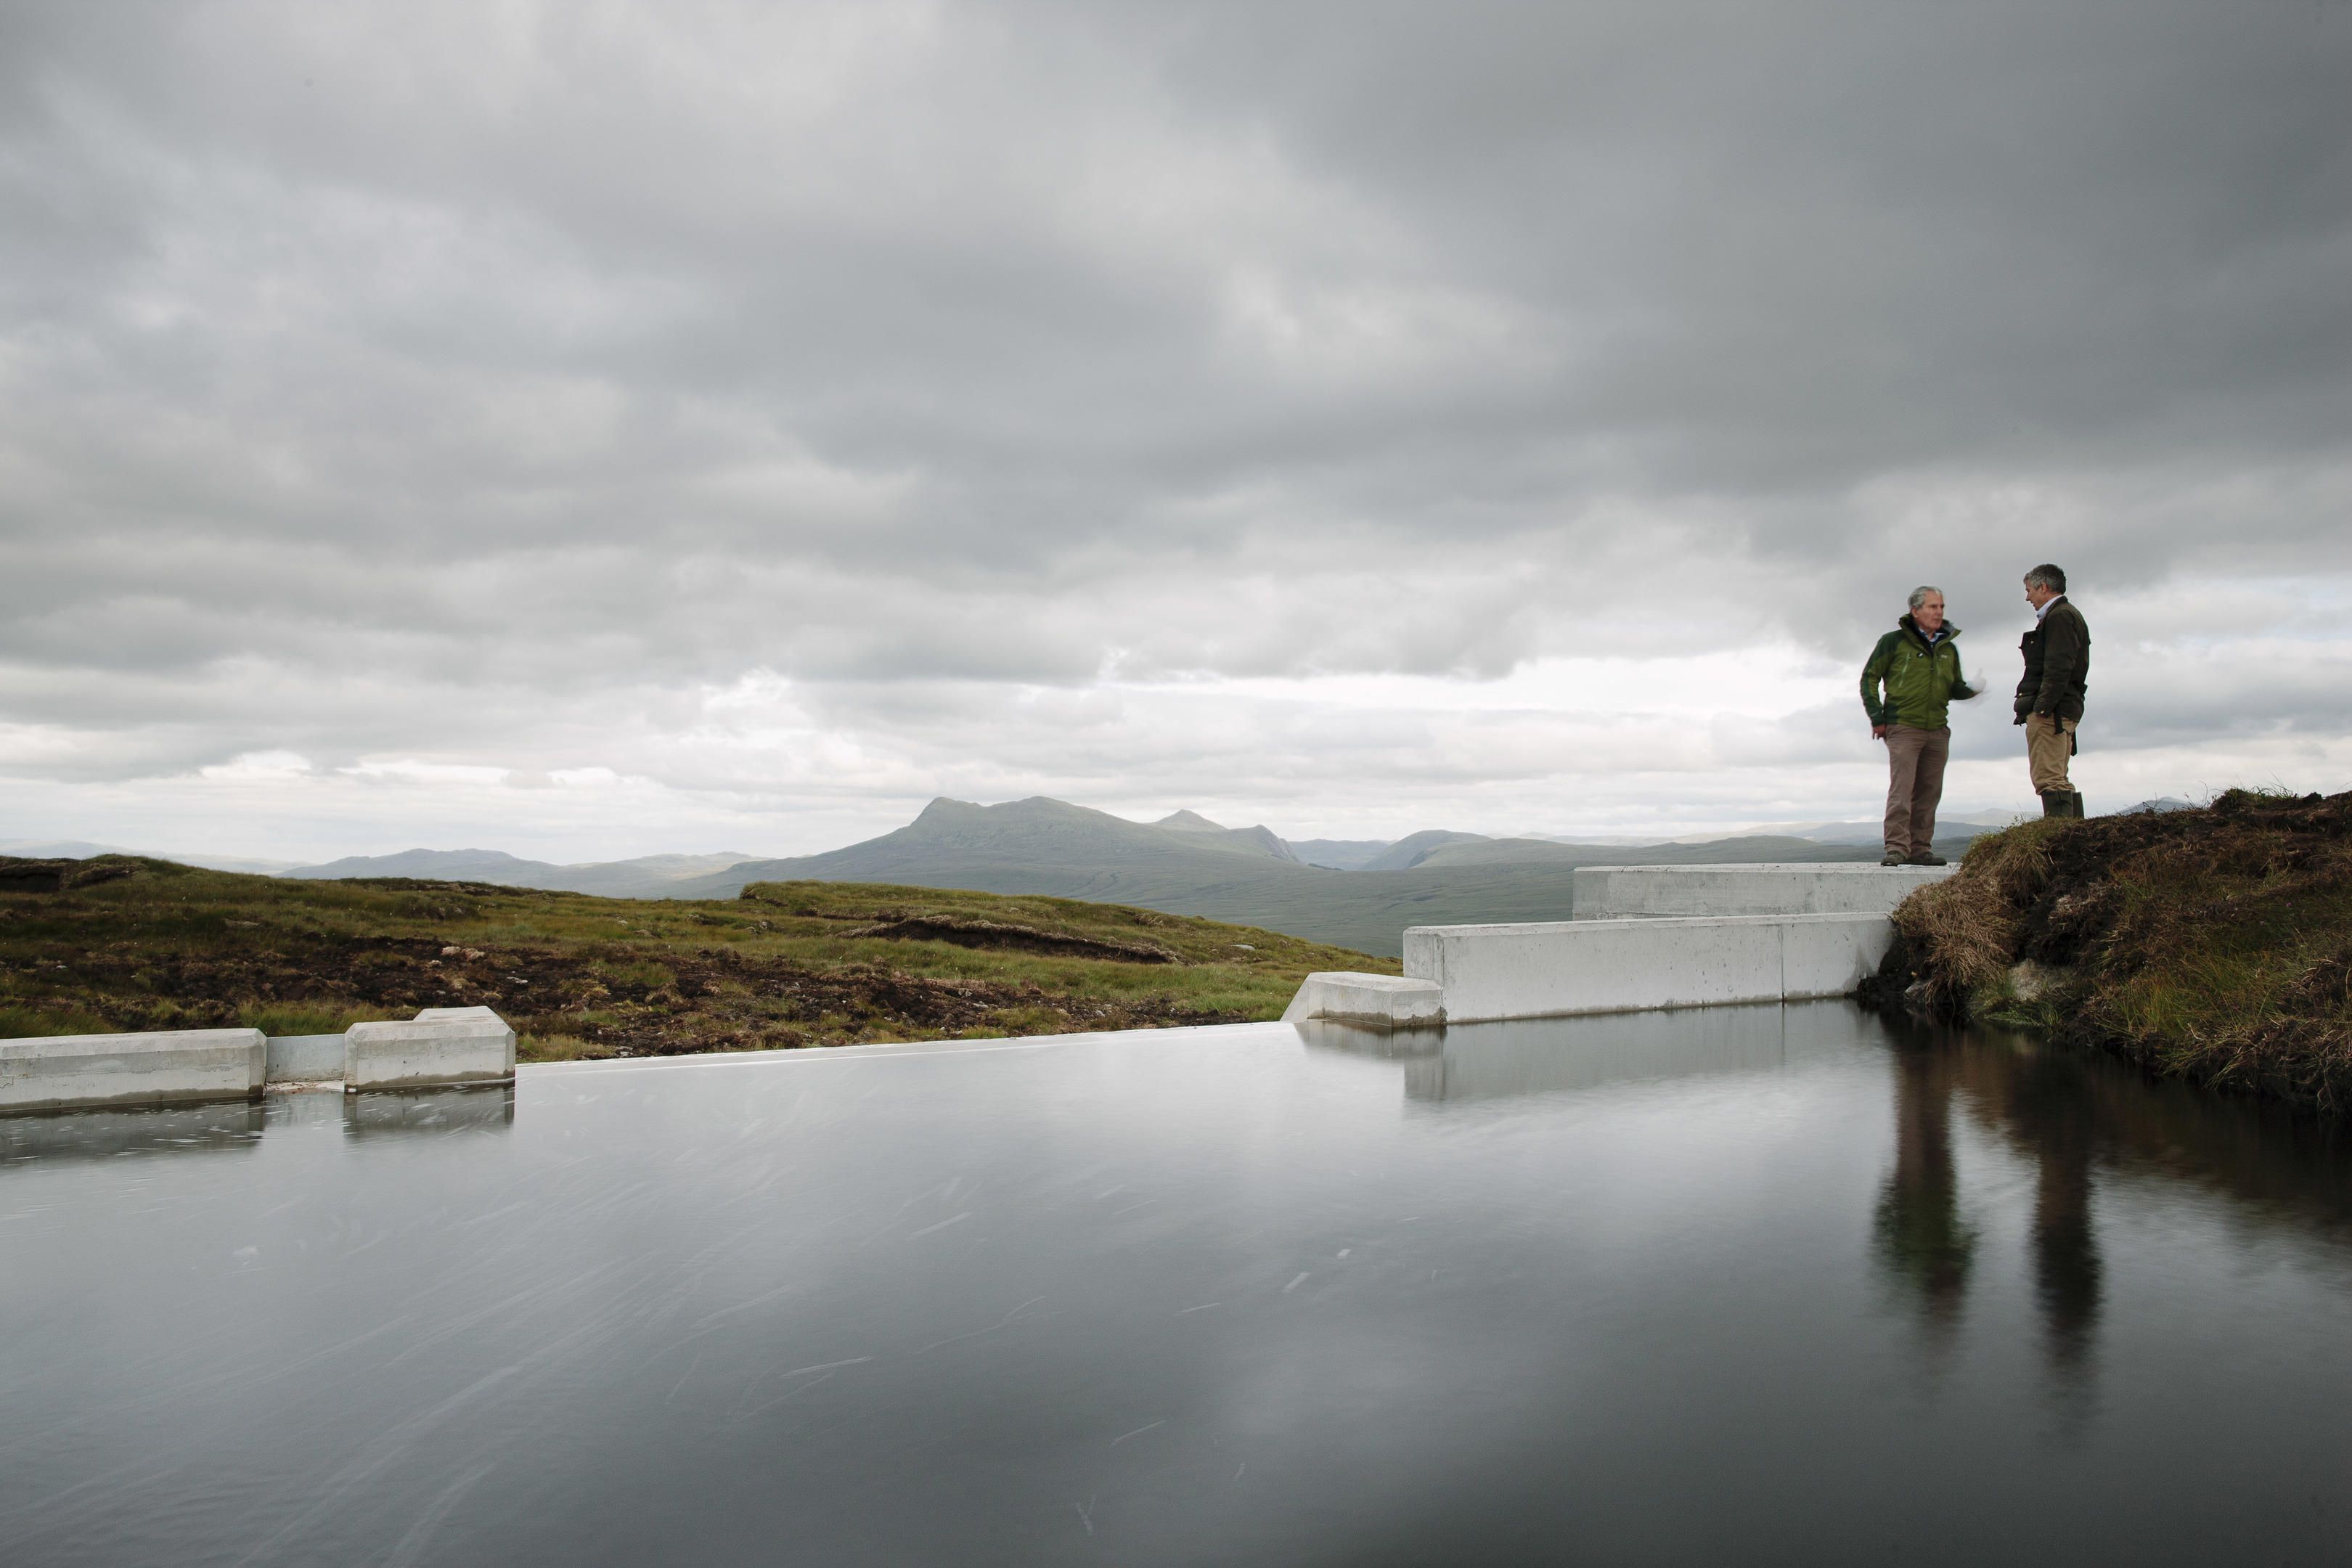 A small-scale, run of river hydro scheme in the Scottish Highlands